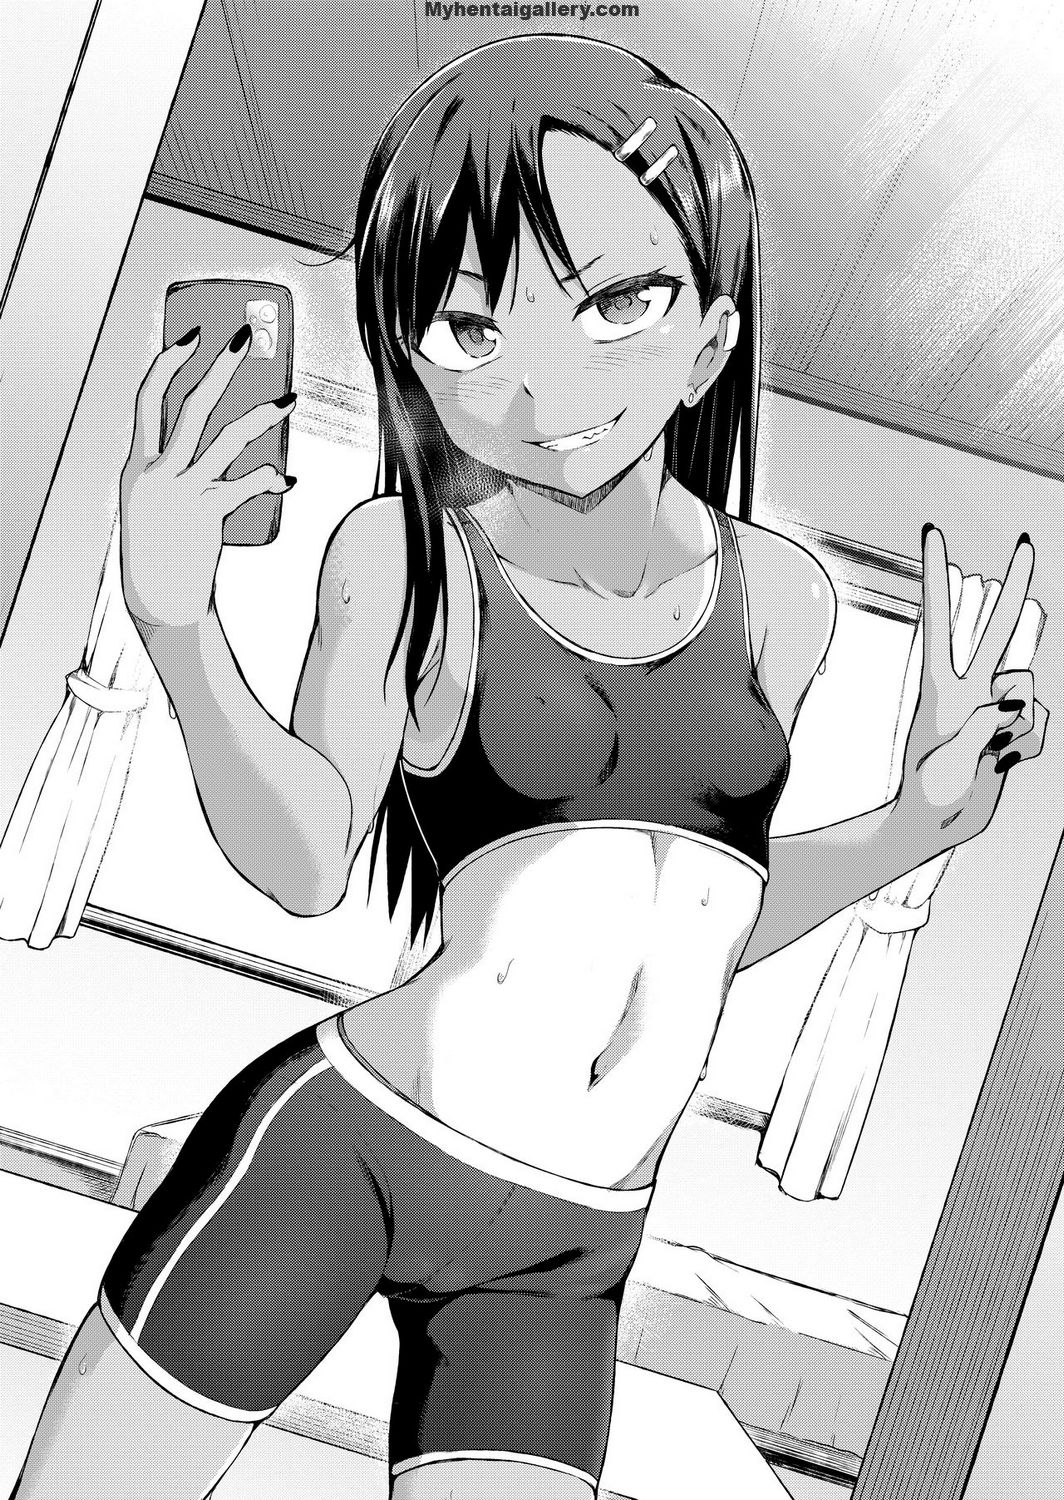 In my opinion, Ghetto Youth (GY) makes the best lewds for Nagatoro out ther...